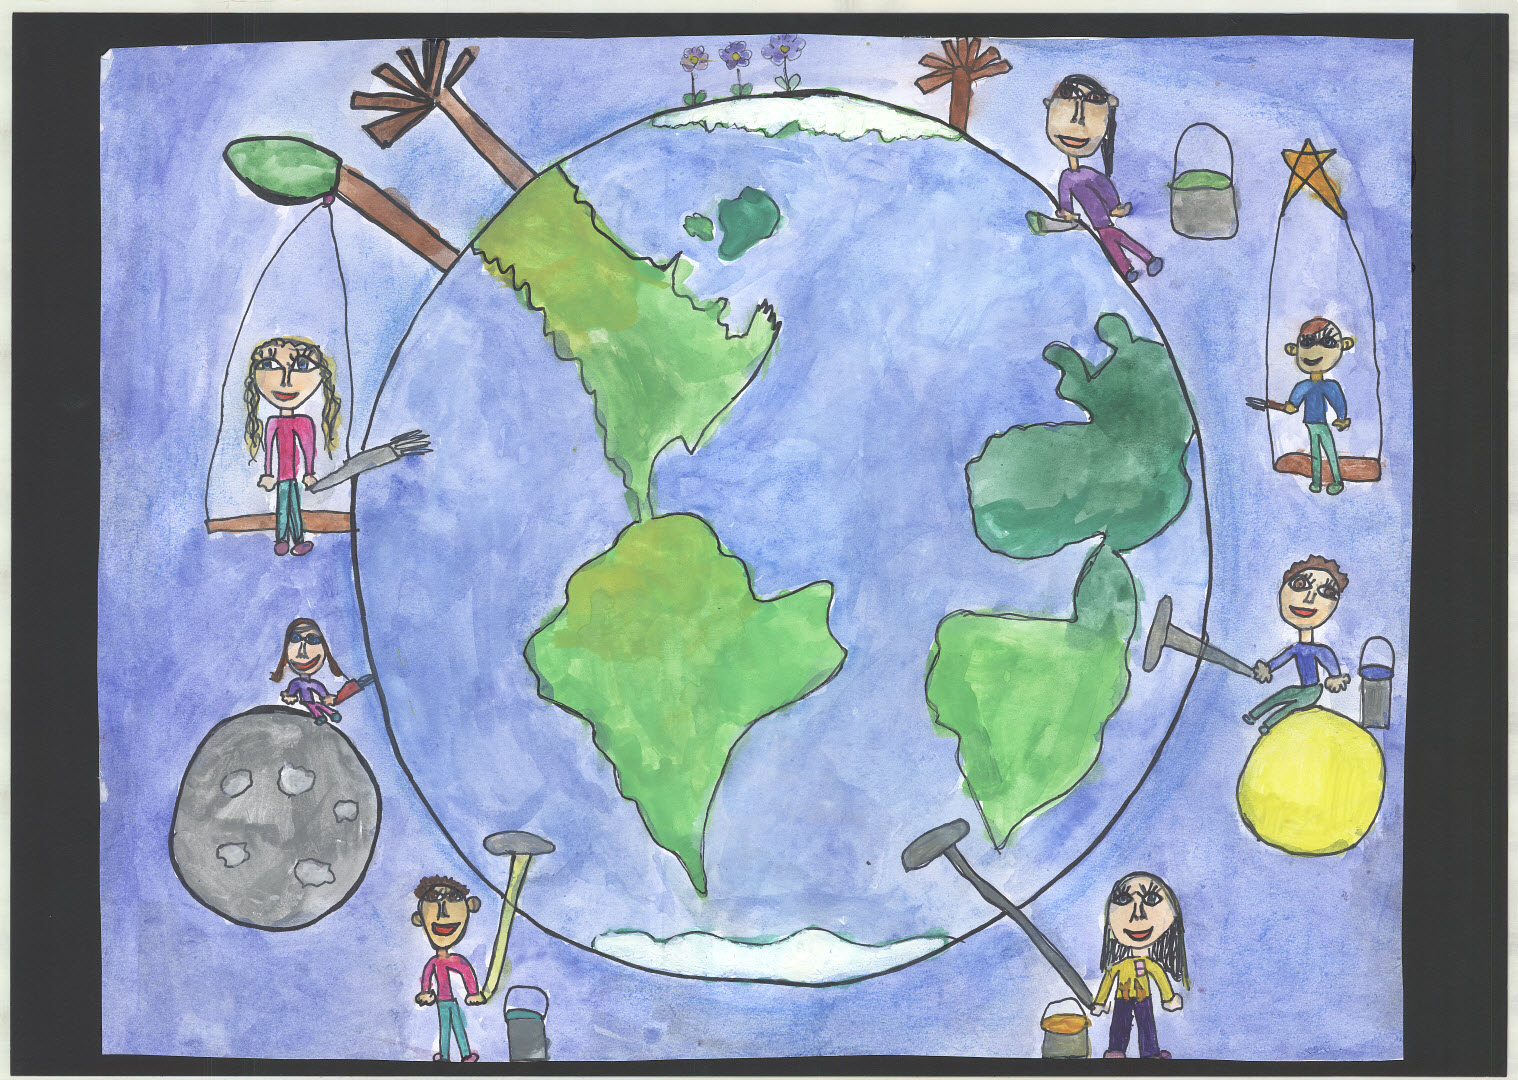 Shows children around the world, painting the planet